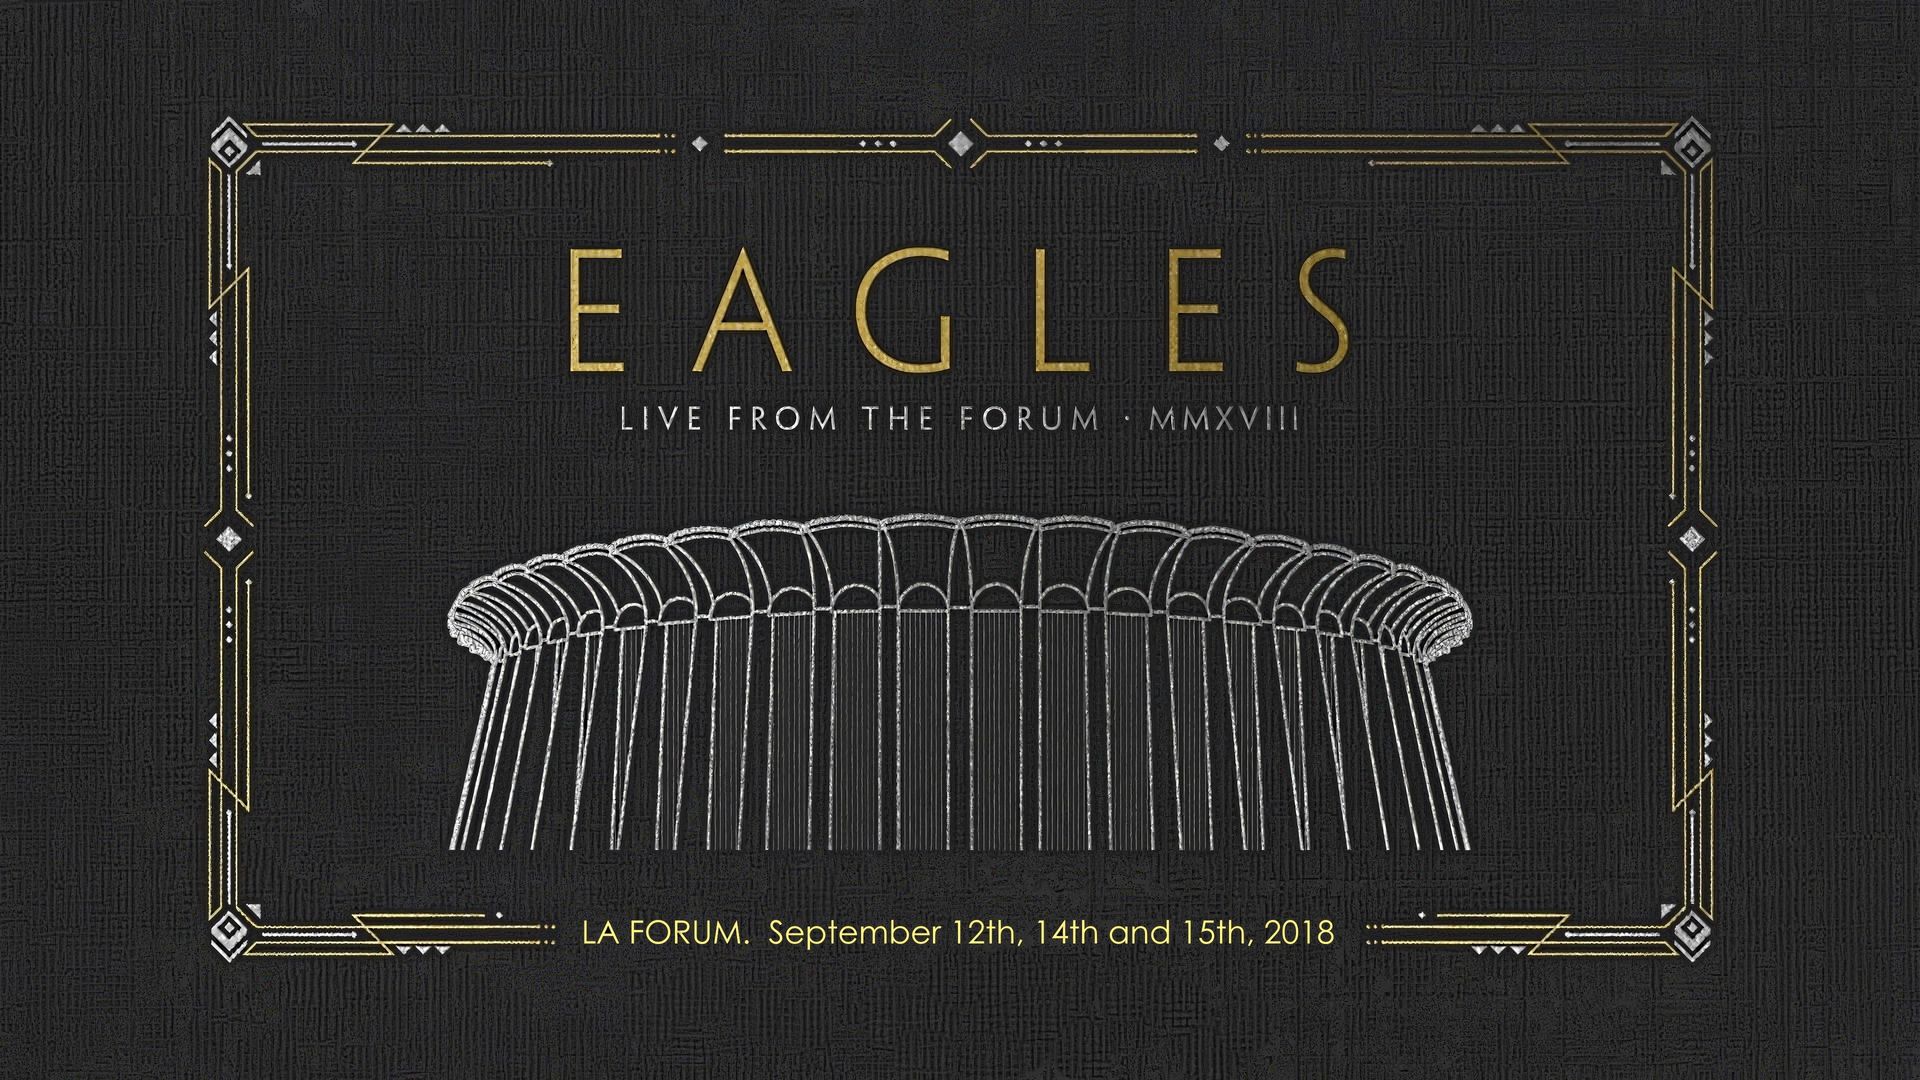 Eagles. Live from the Forum MMXVIII background